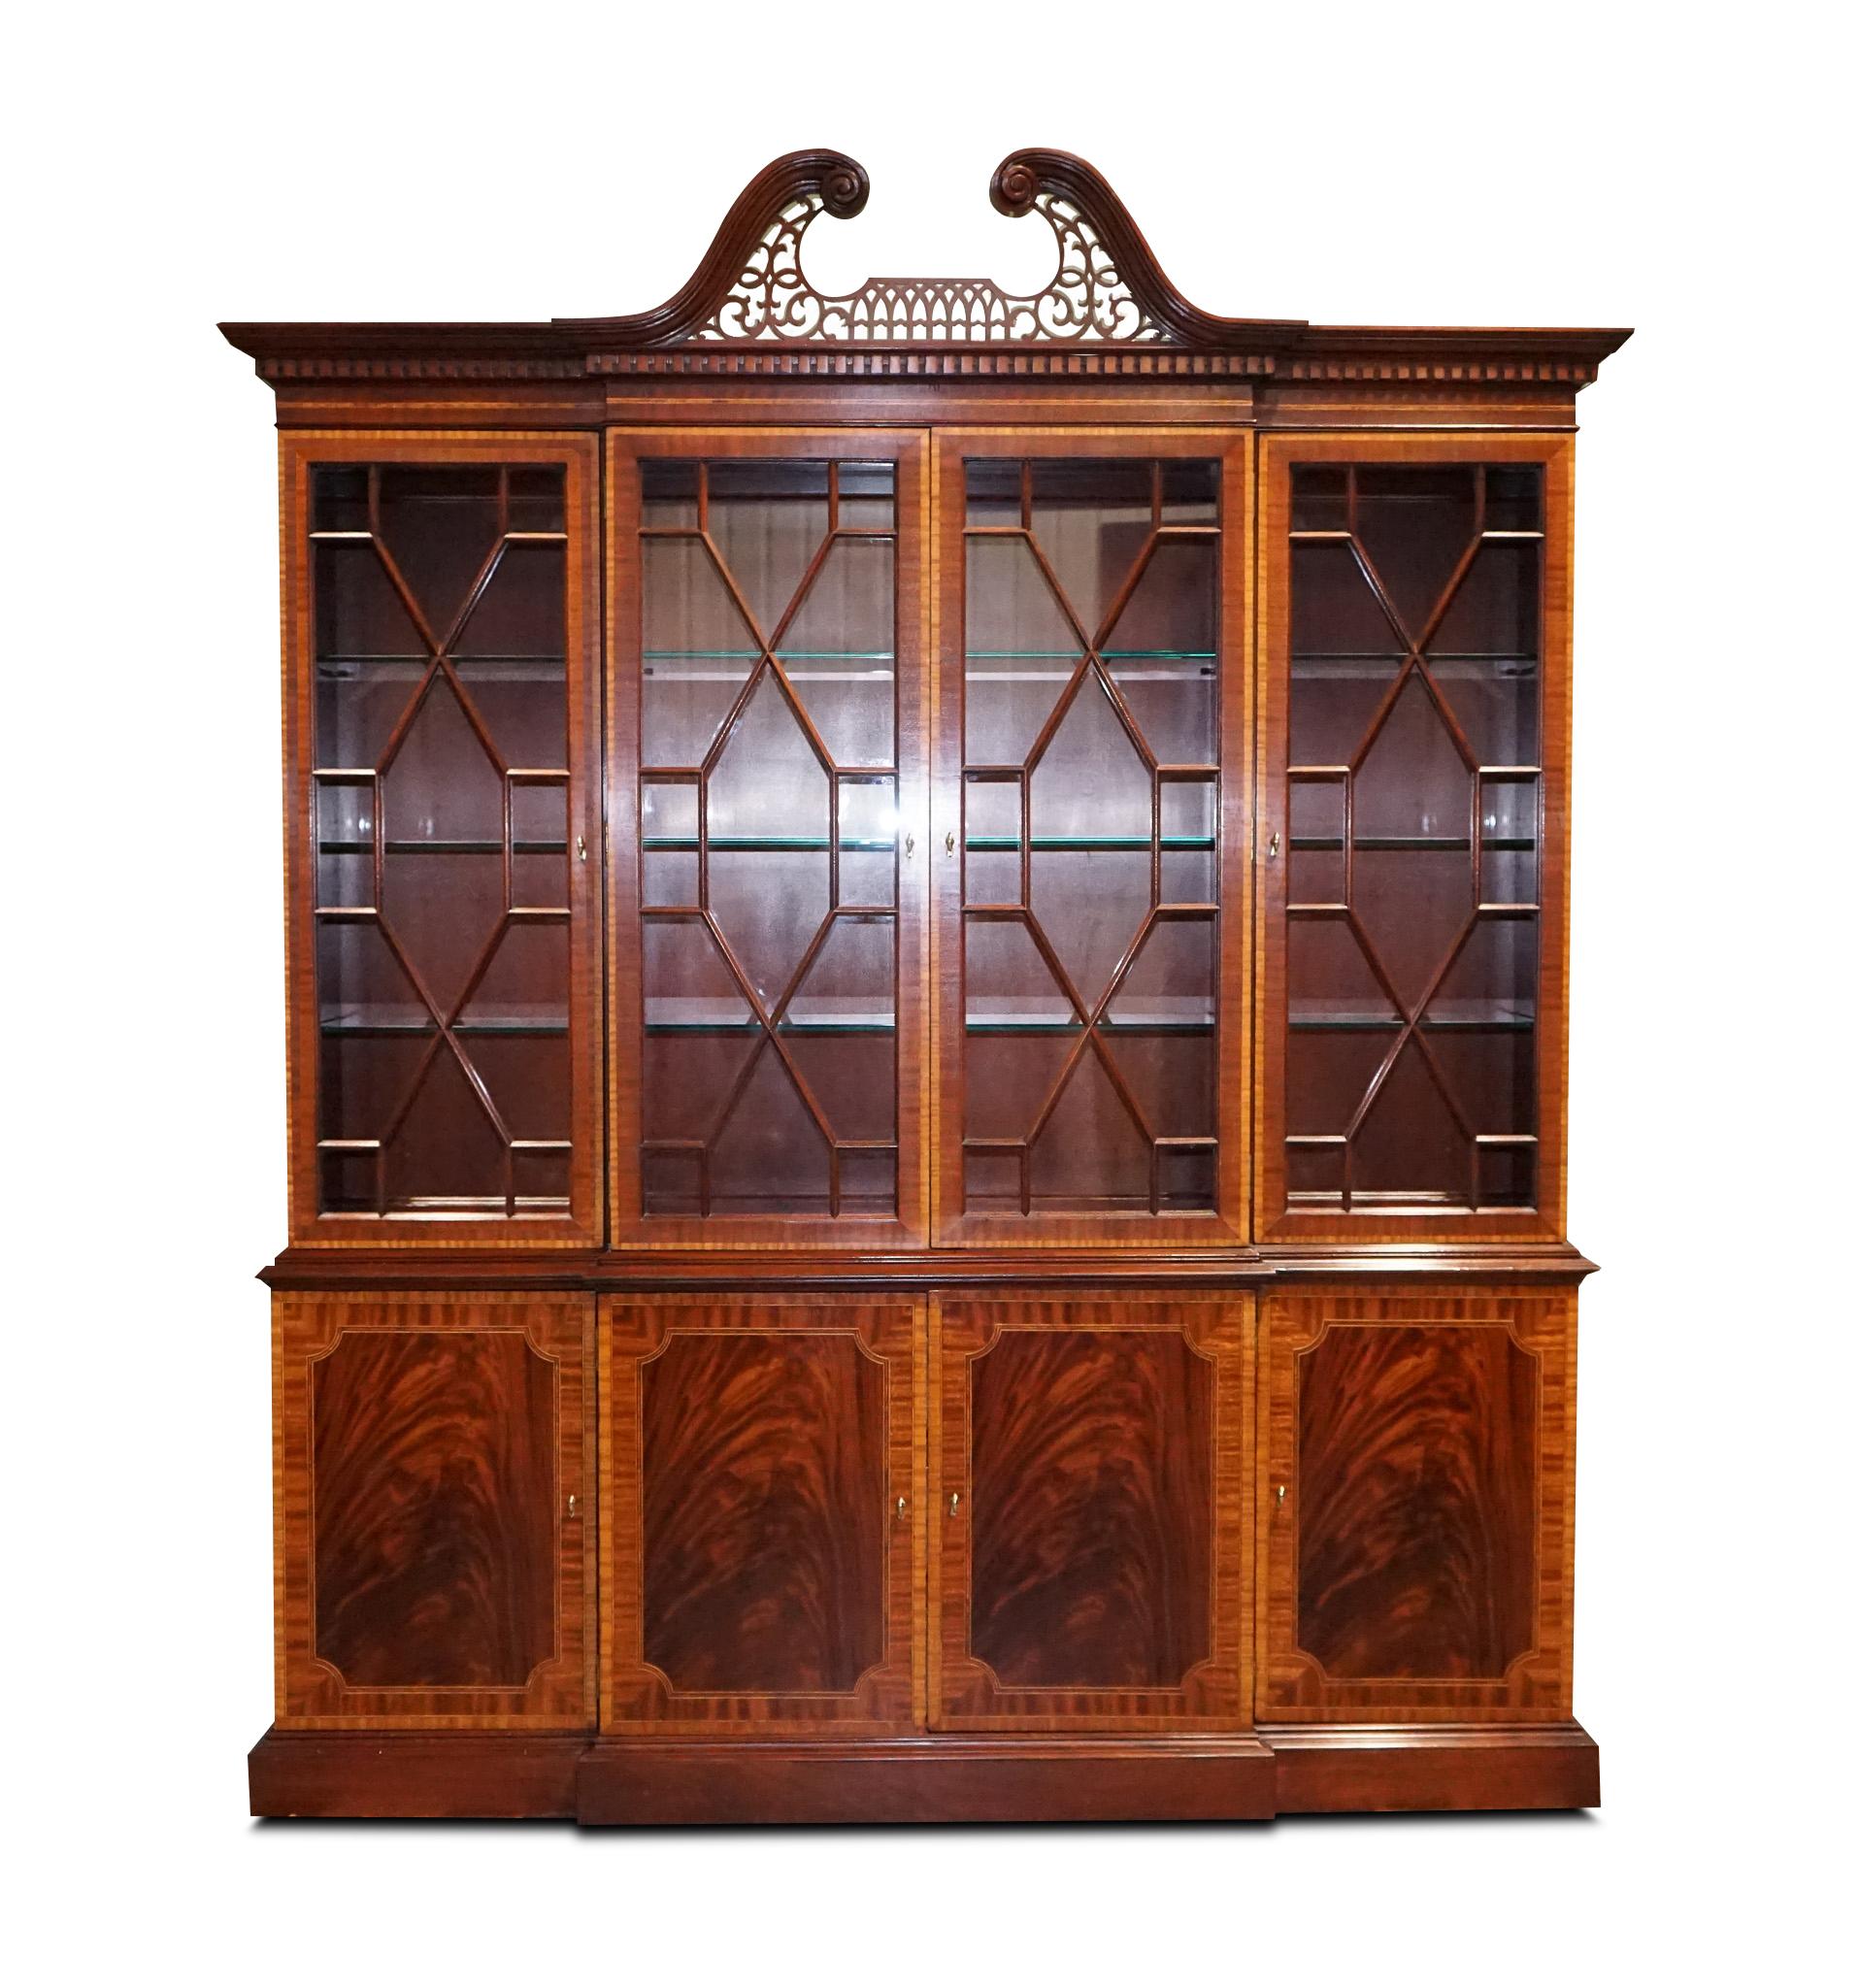 British Large Georgian Style Mahogany Breakfront Bookcase Councill Furniture For Sale